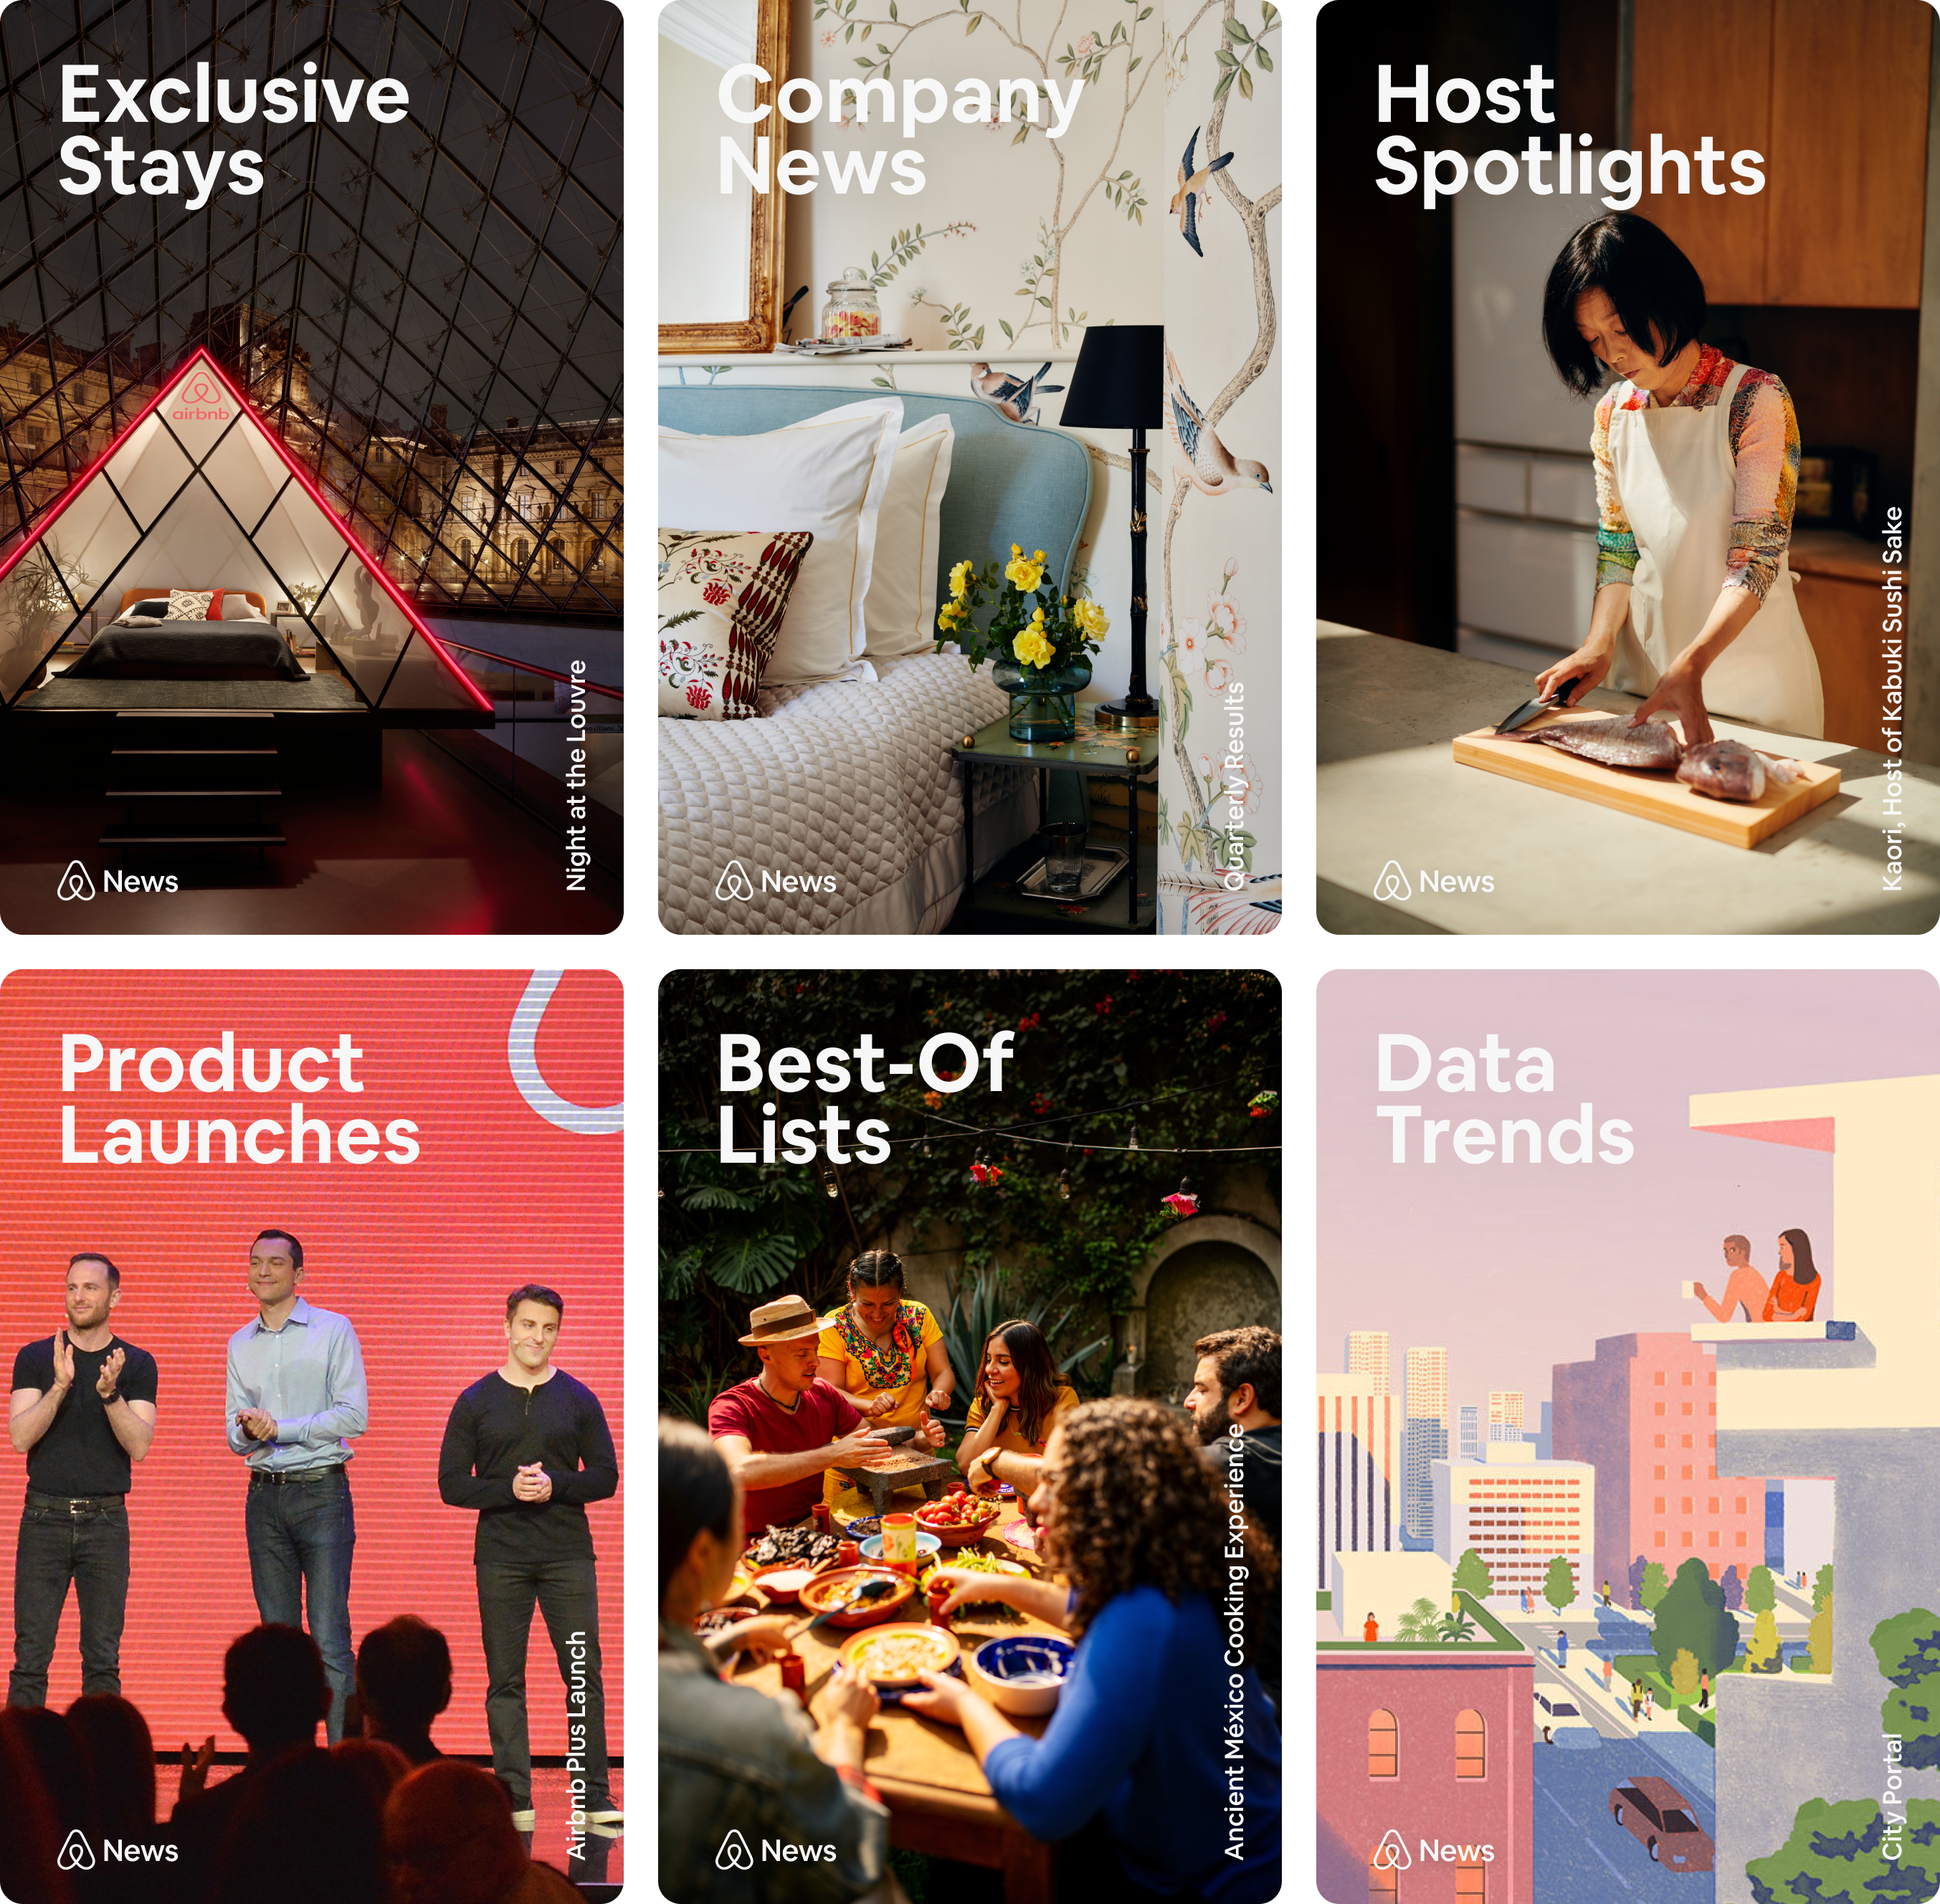 Airbnb_News_Posters_All